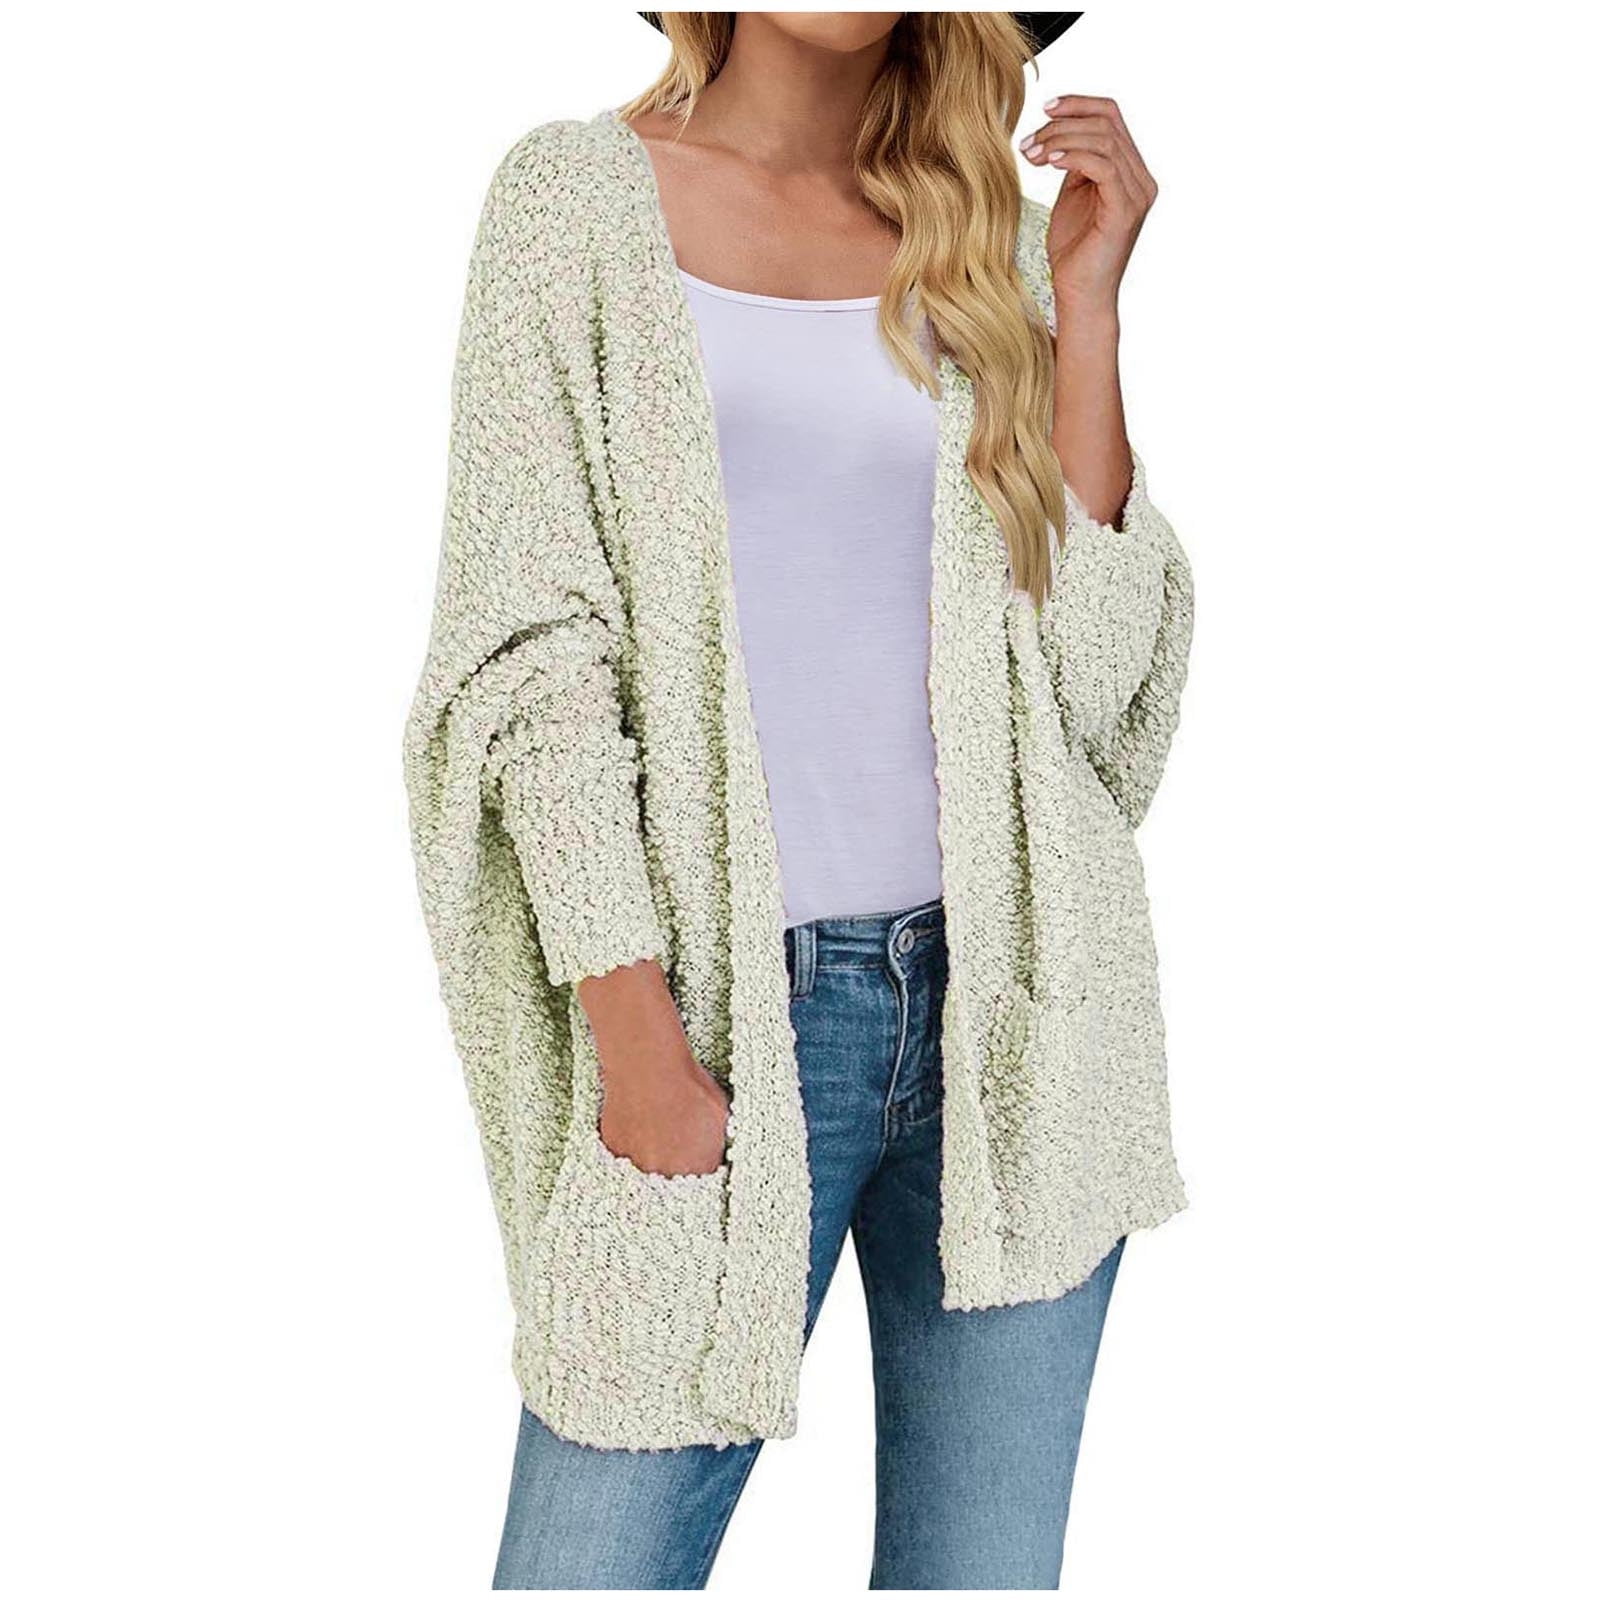 Fluffy Cardigans for Women Womens Cardigan Sweaters Plus Size Halloween  Sweater Short Sleeve Cardigans for Women 1 Items one Dollar Items only 1.00